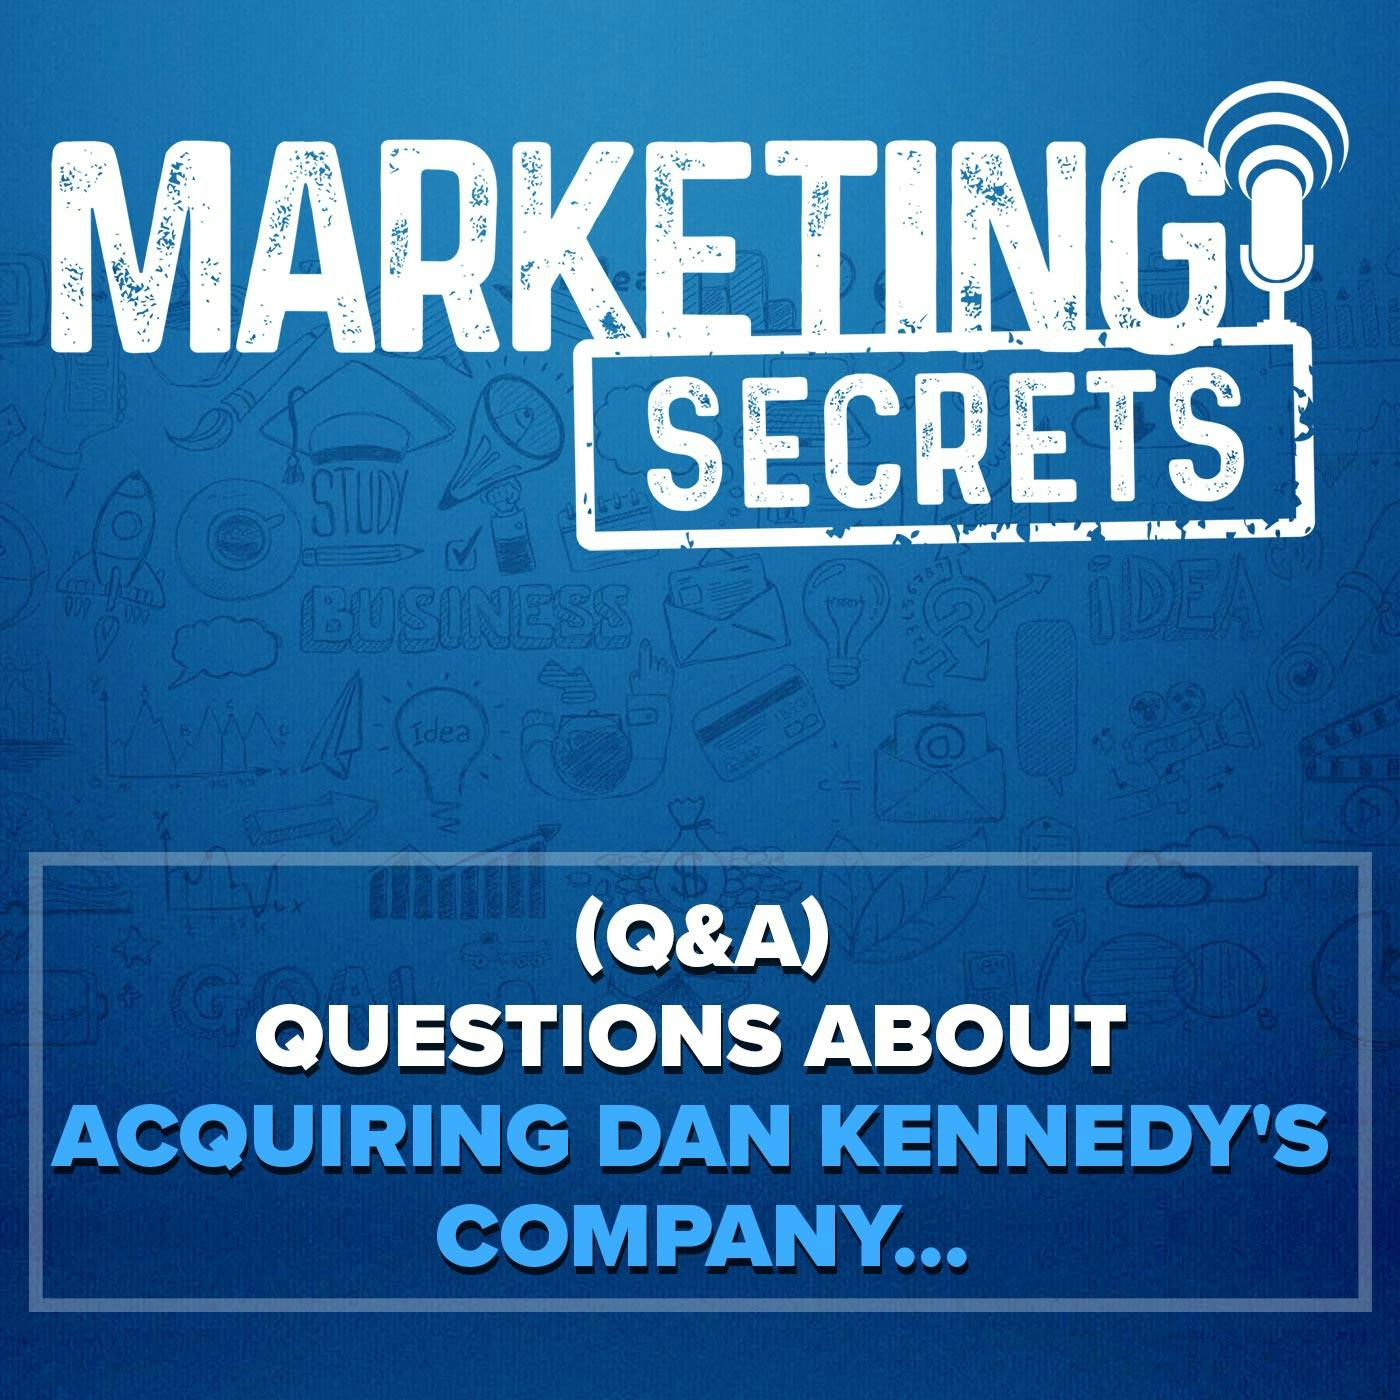 (Q&A) Questions About Acquiring Dan Kennedy's Company...